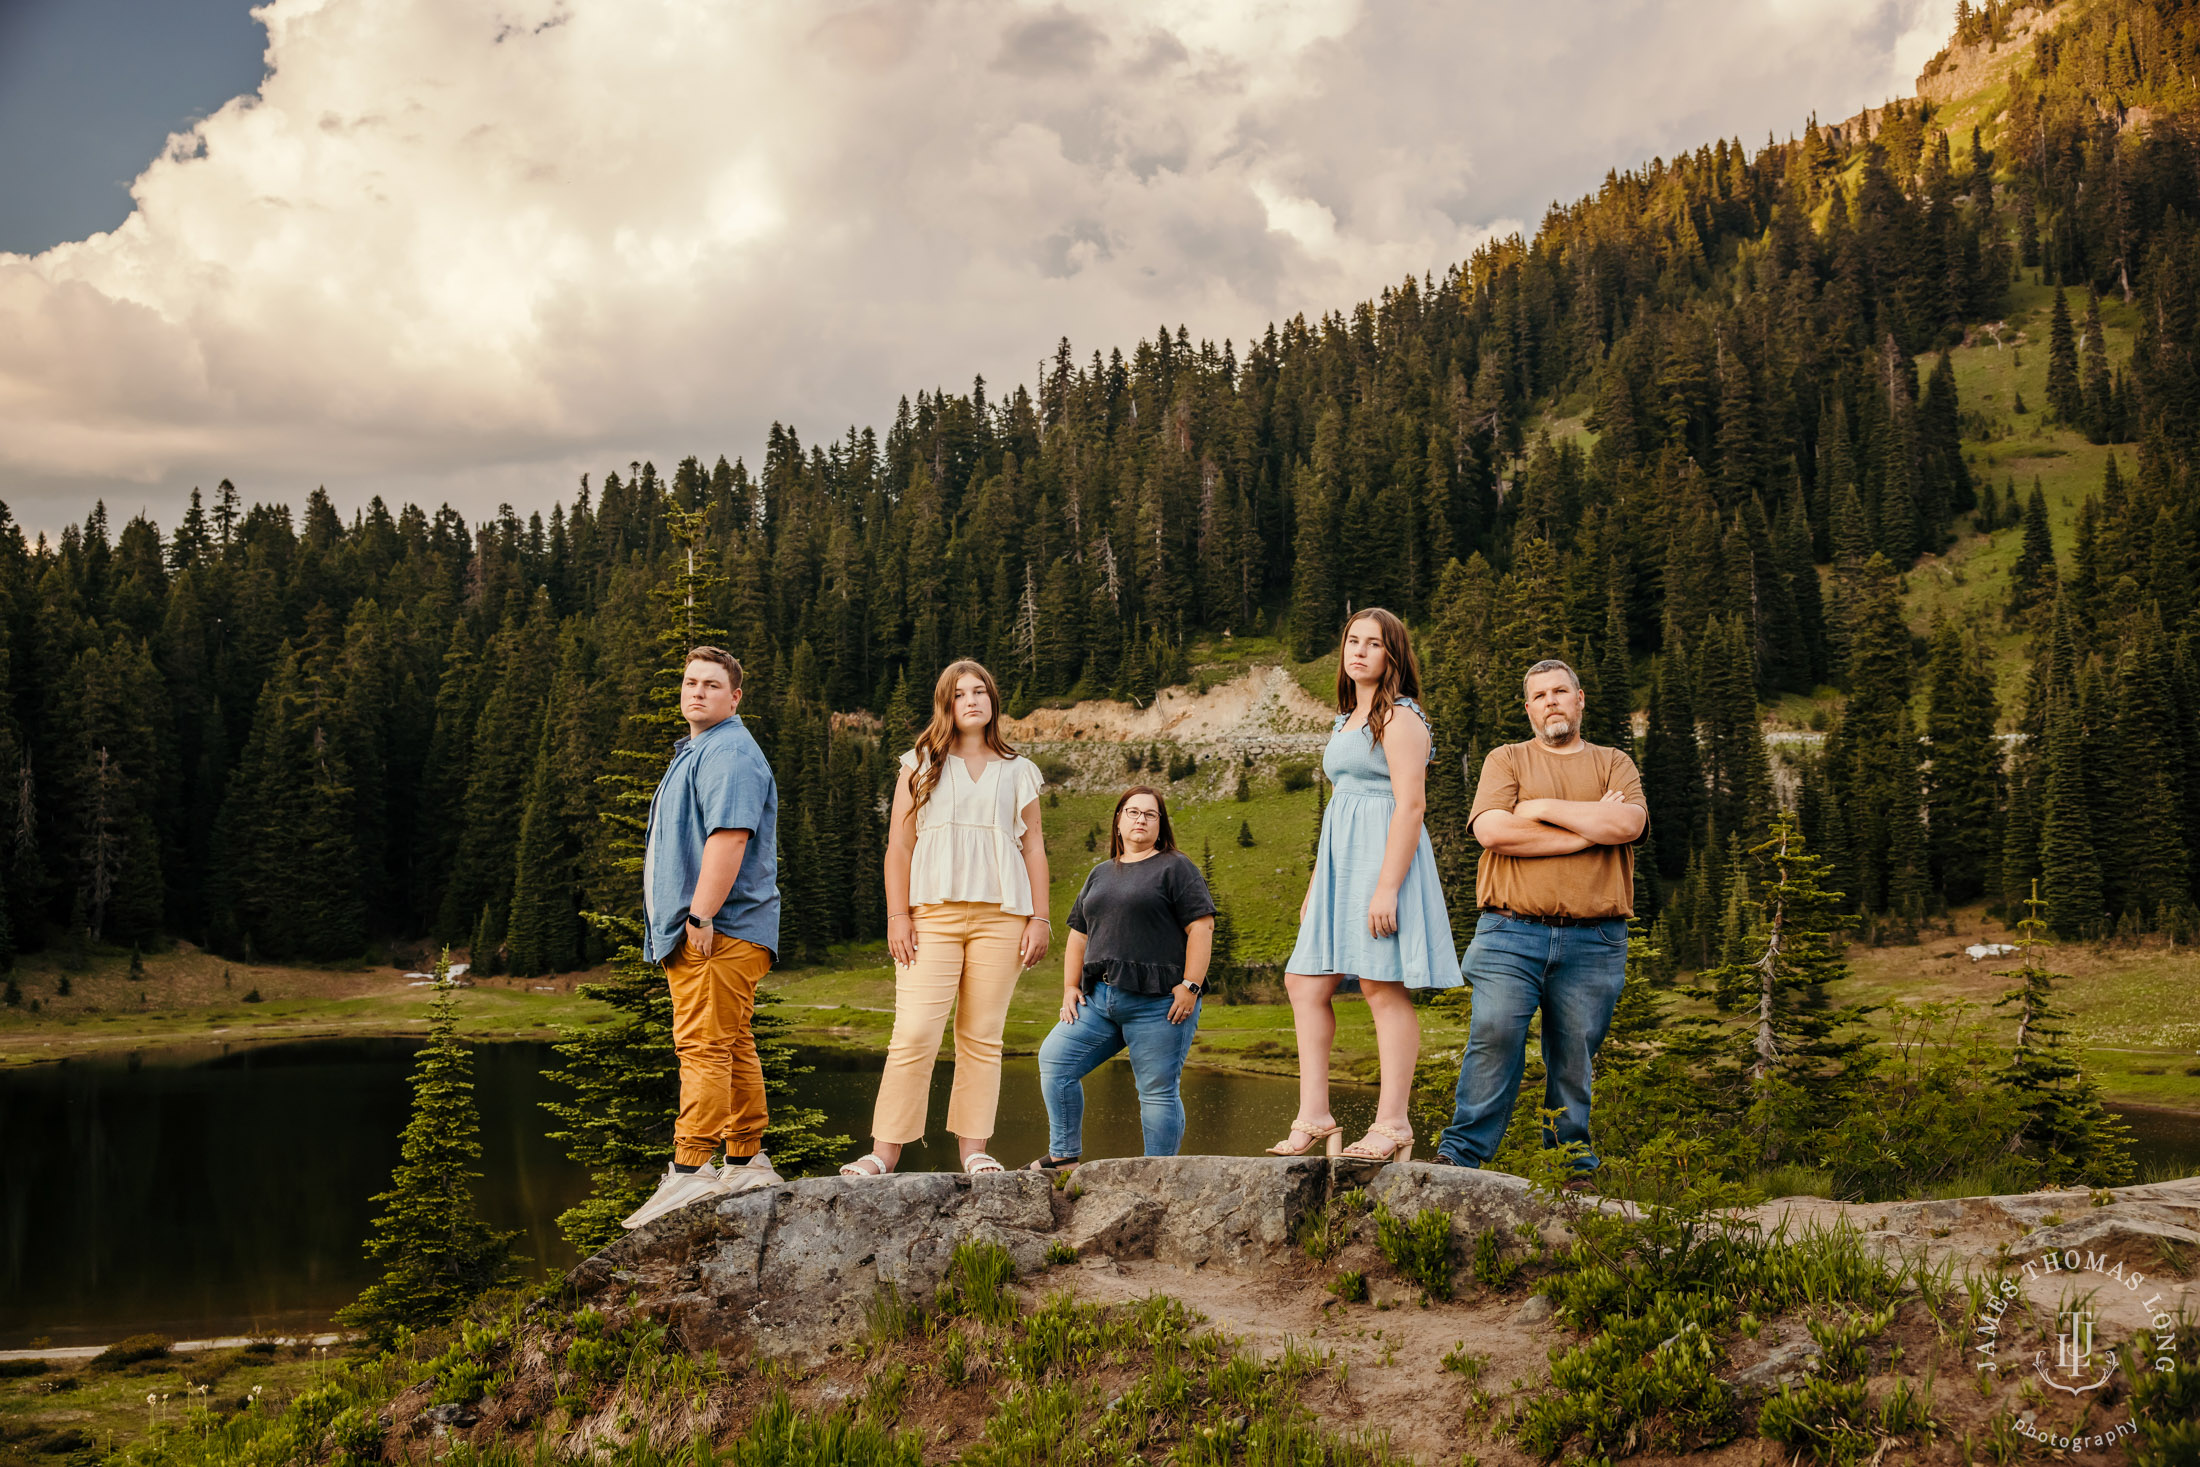 Mount Rainier family photography session by Seattle family photographer James Thomas Long Photography